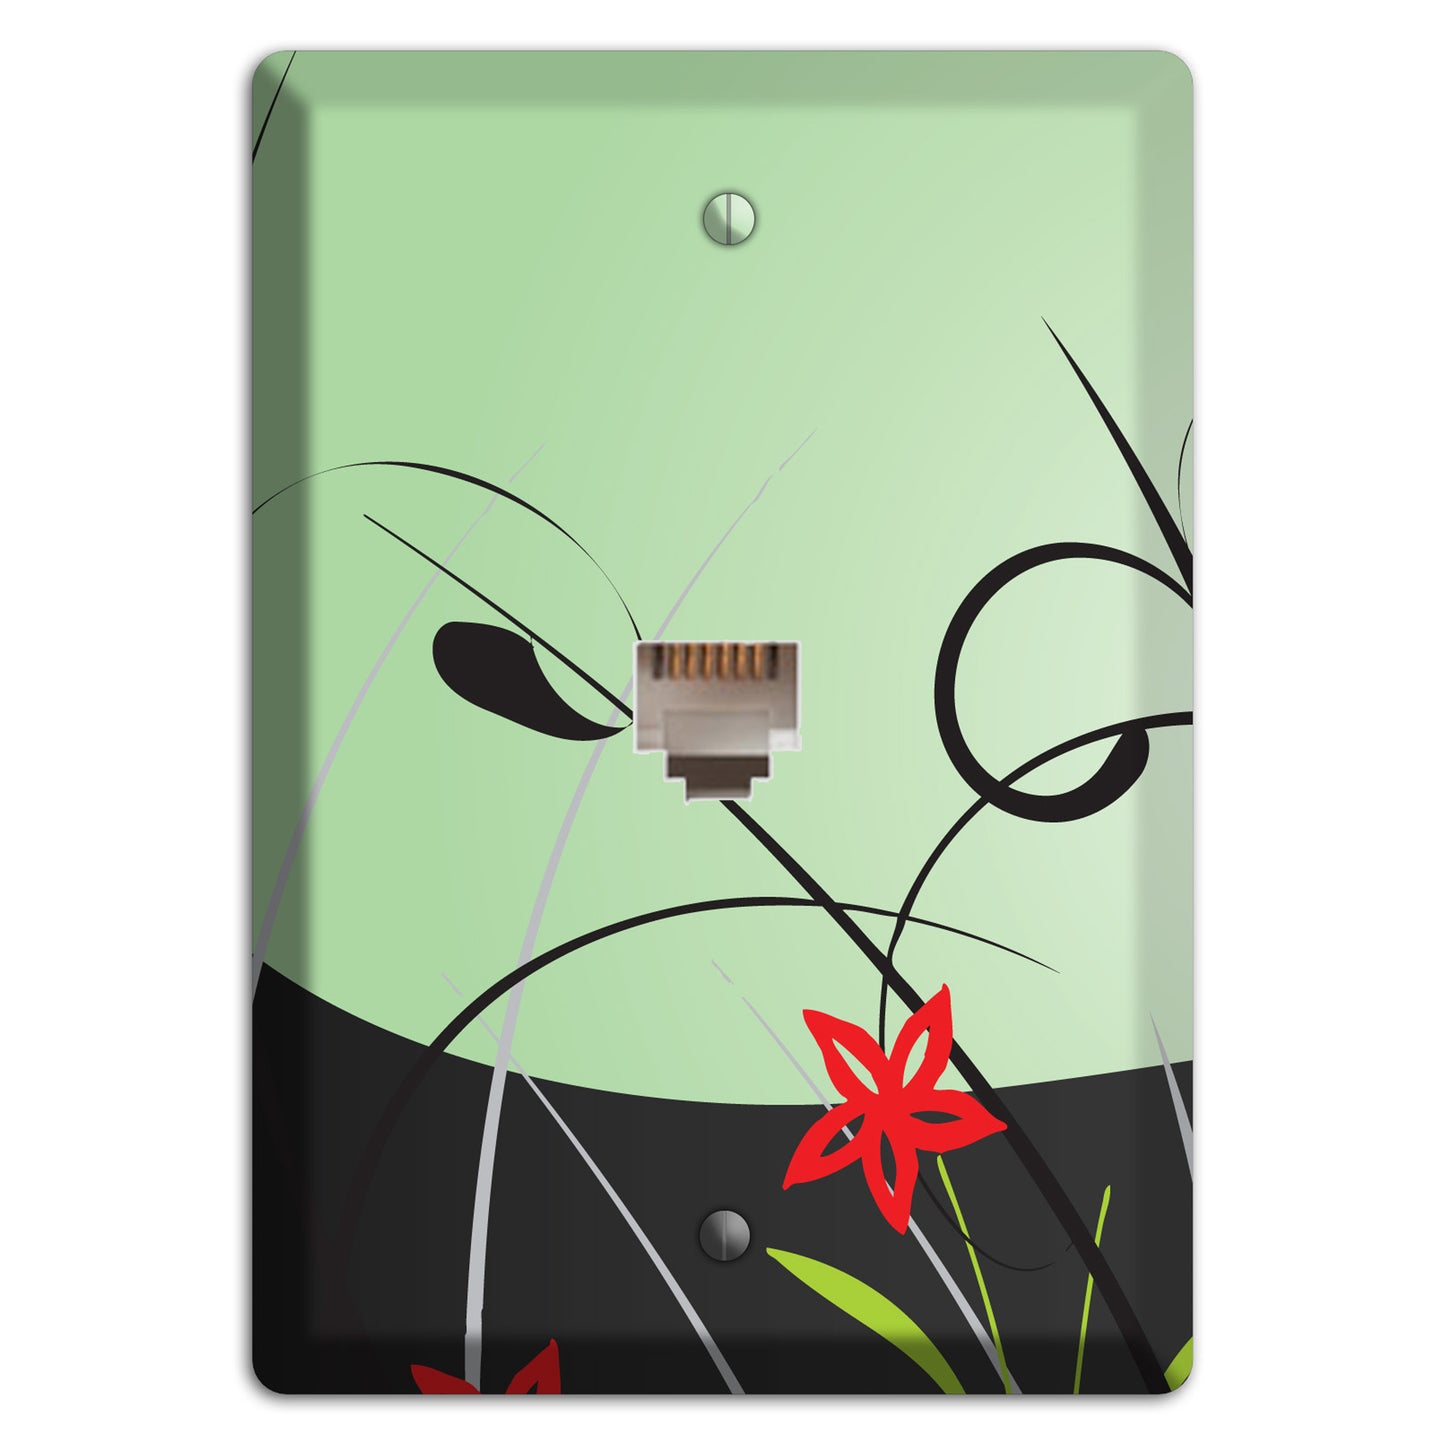 Mint Green Floral Sprig Phone Wallplate